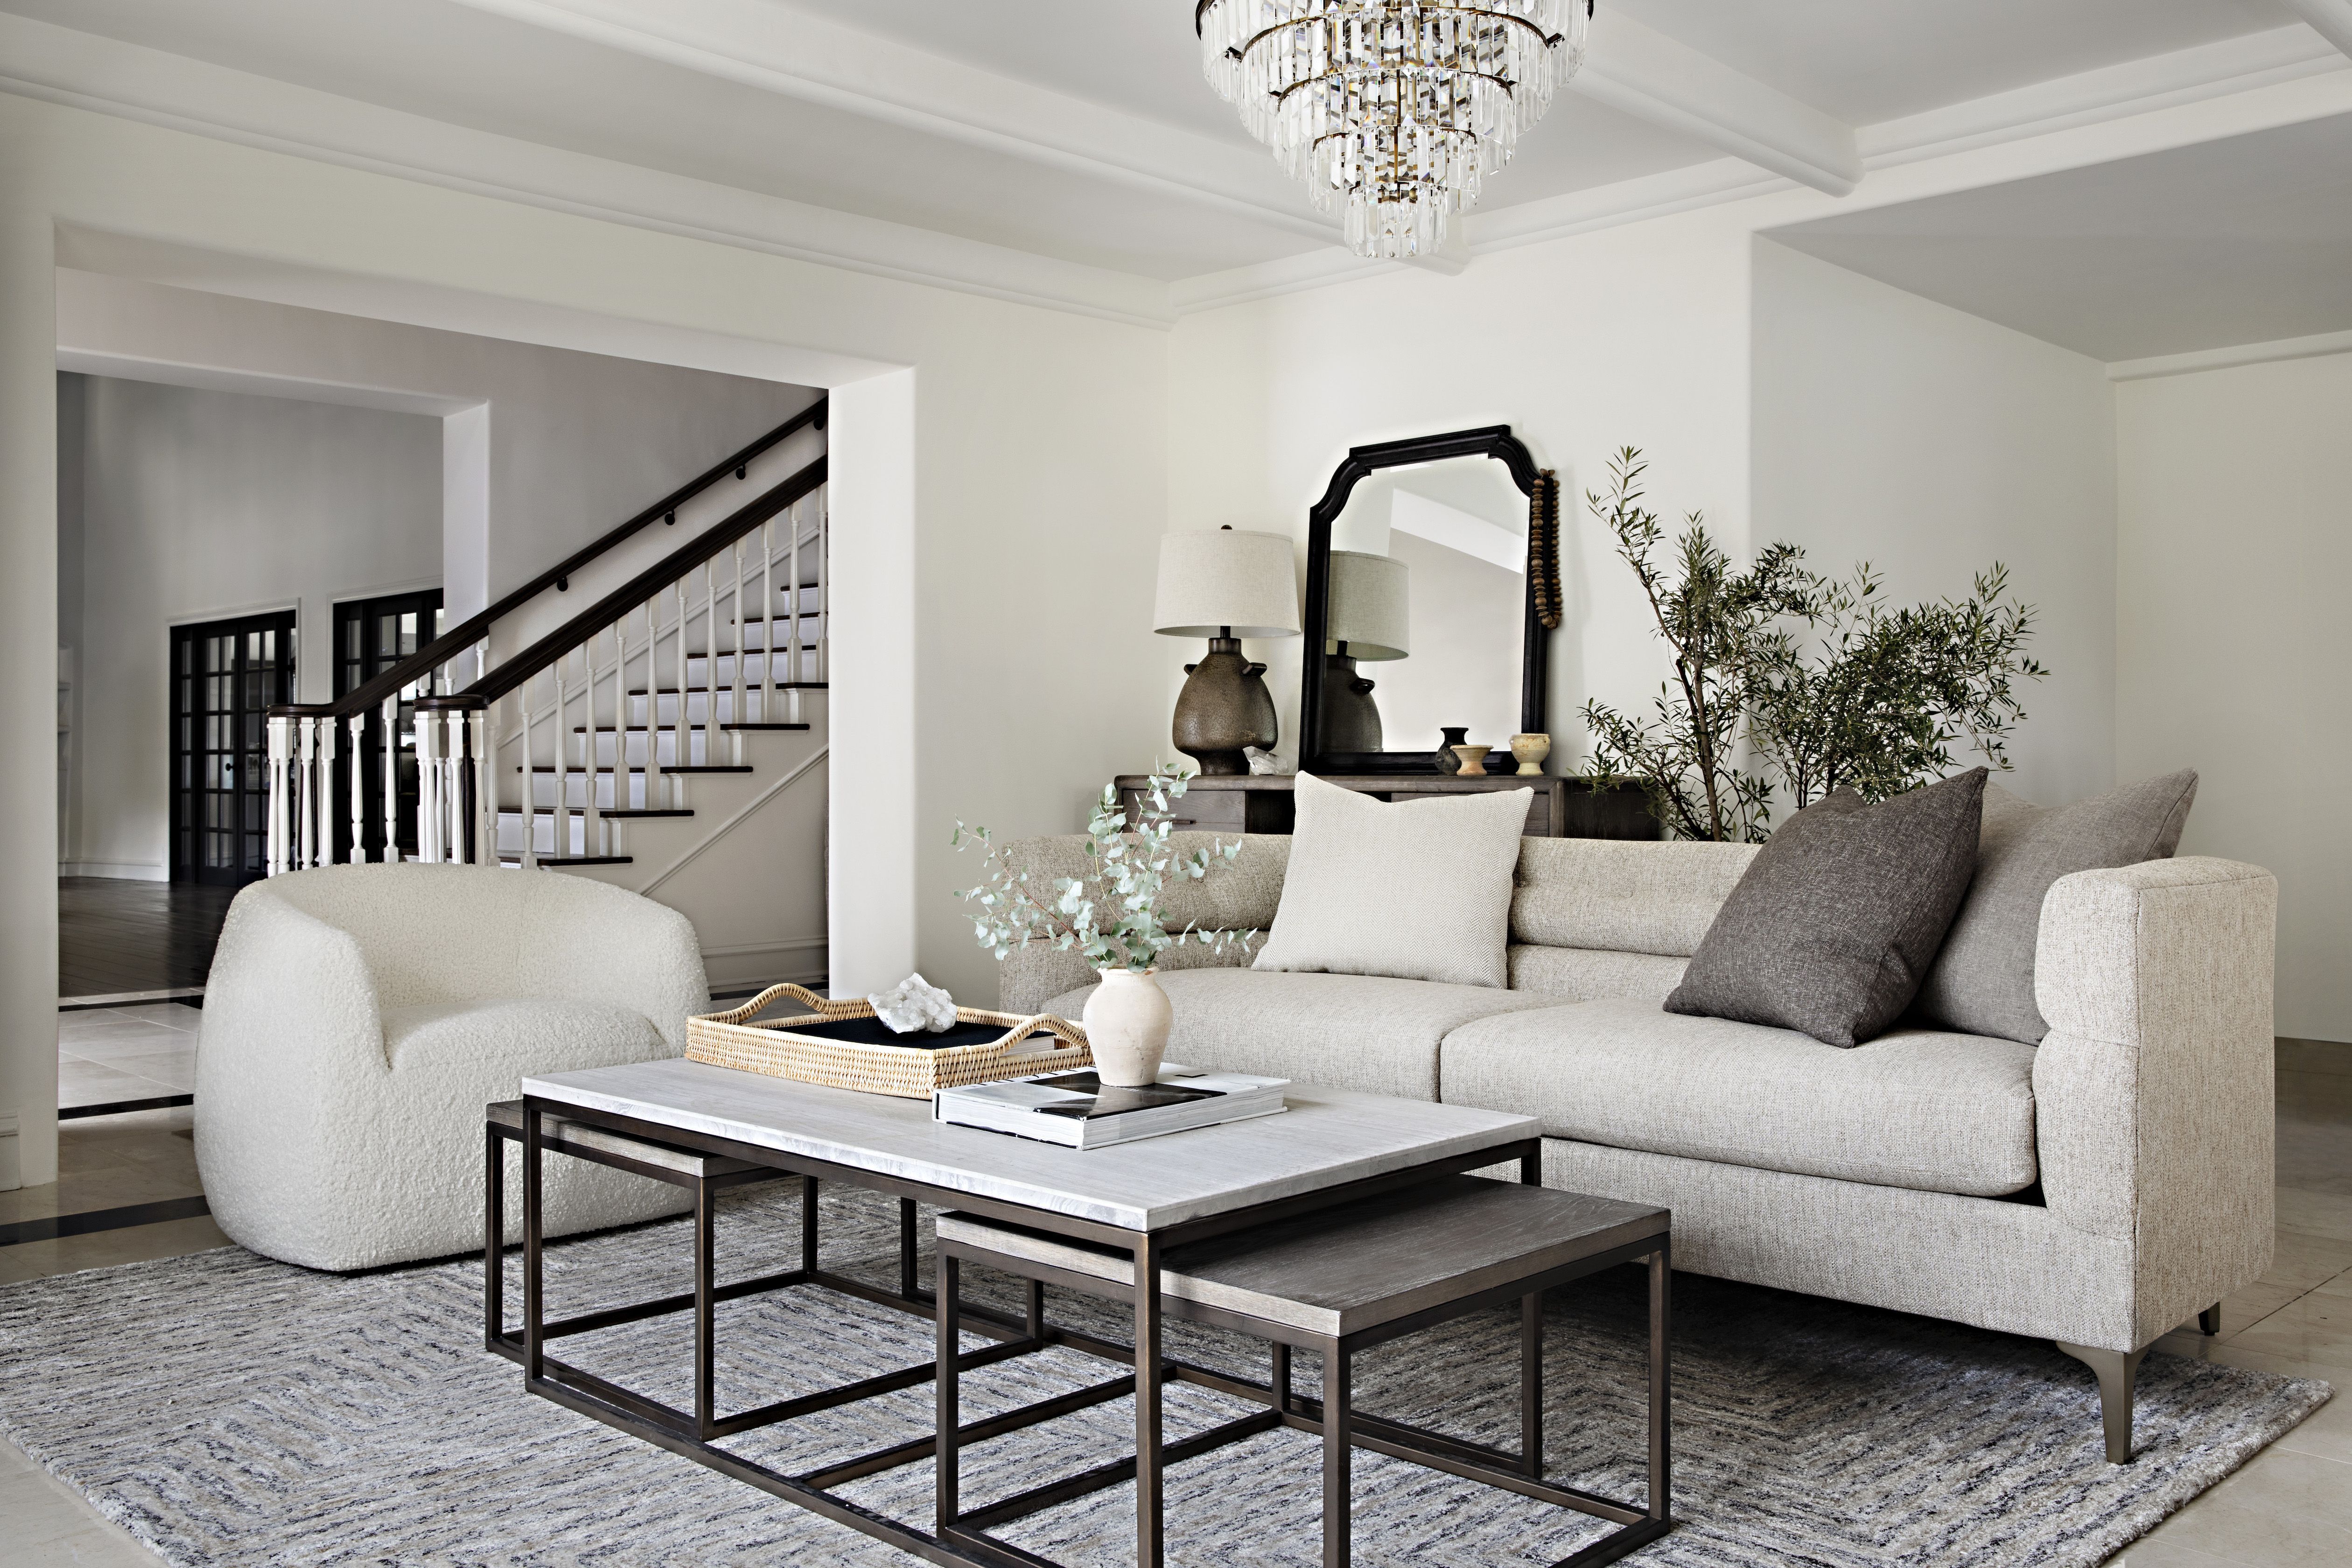 The Latest Fashion Home Trends In An Ultra Modern Elegant Interior